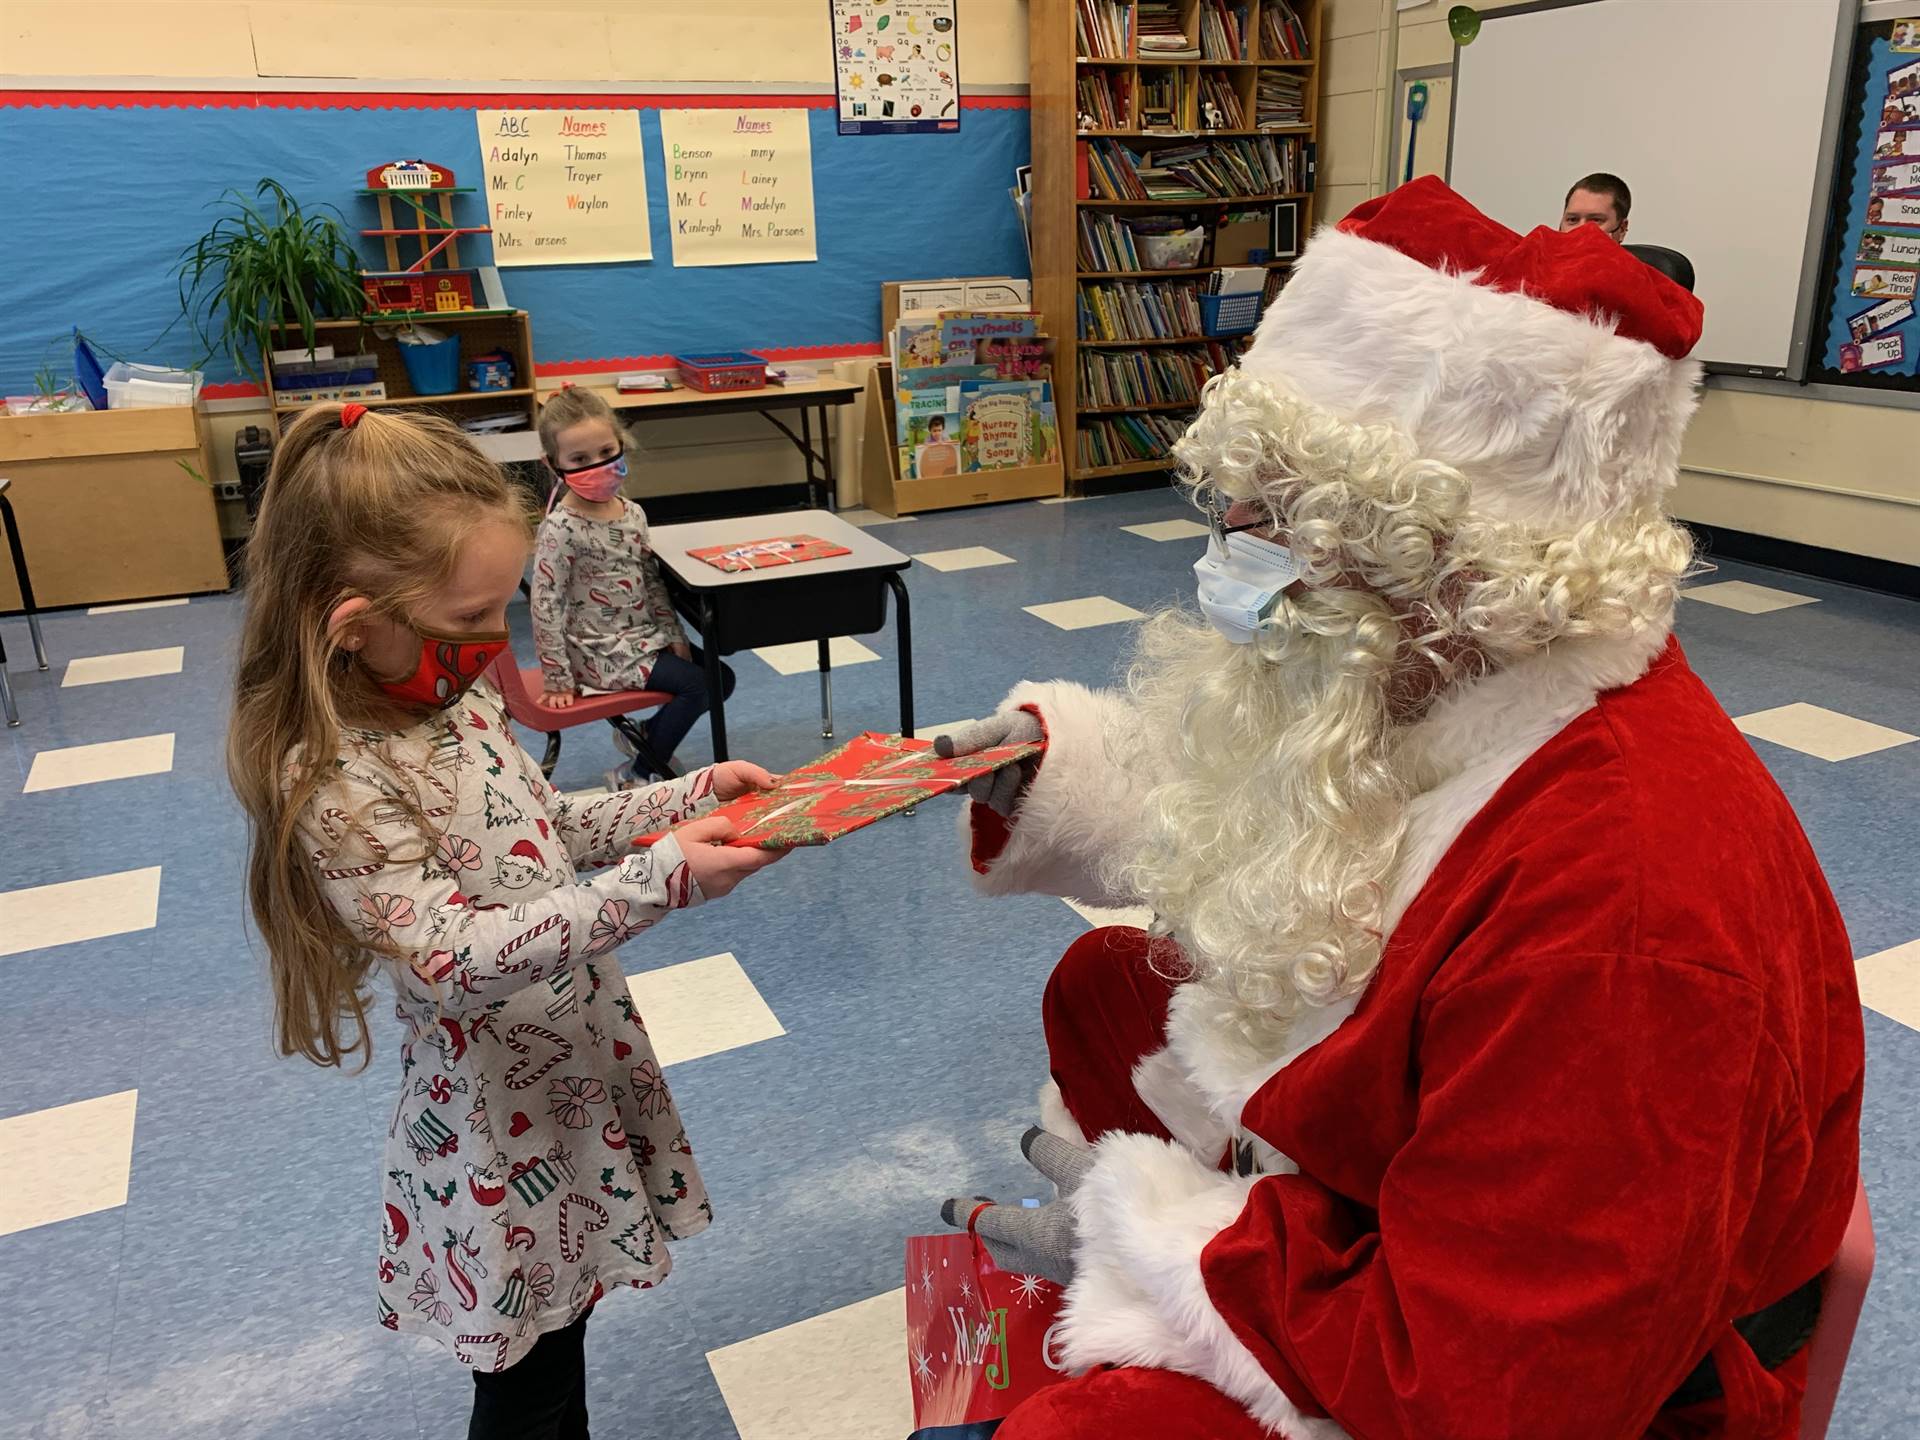 Santa hands a gift out to a child.